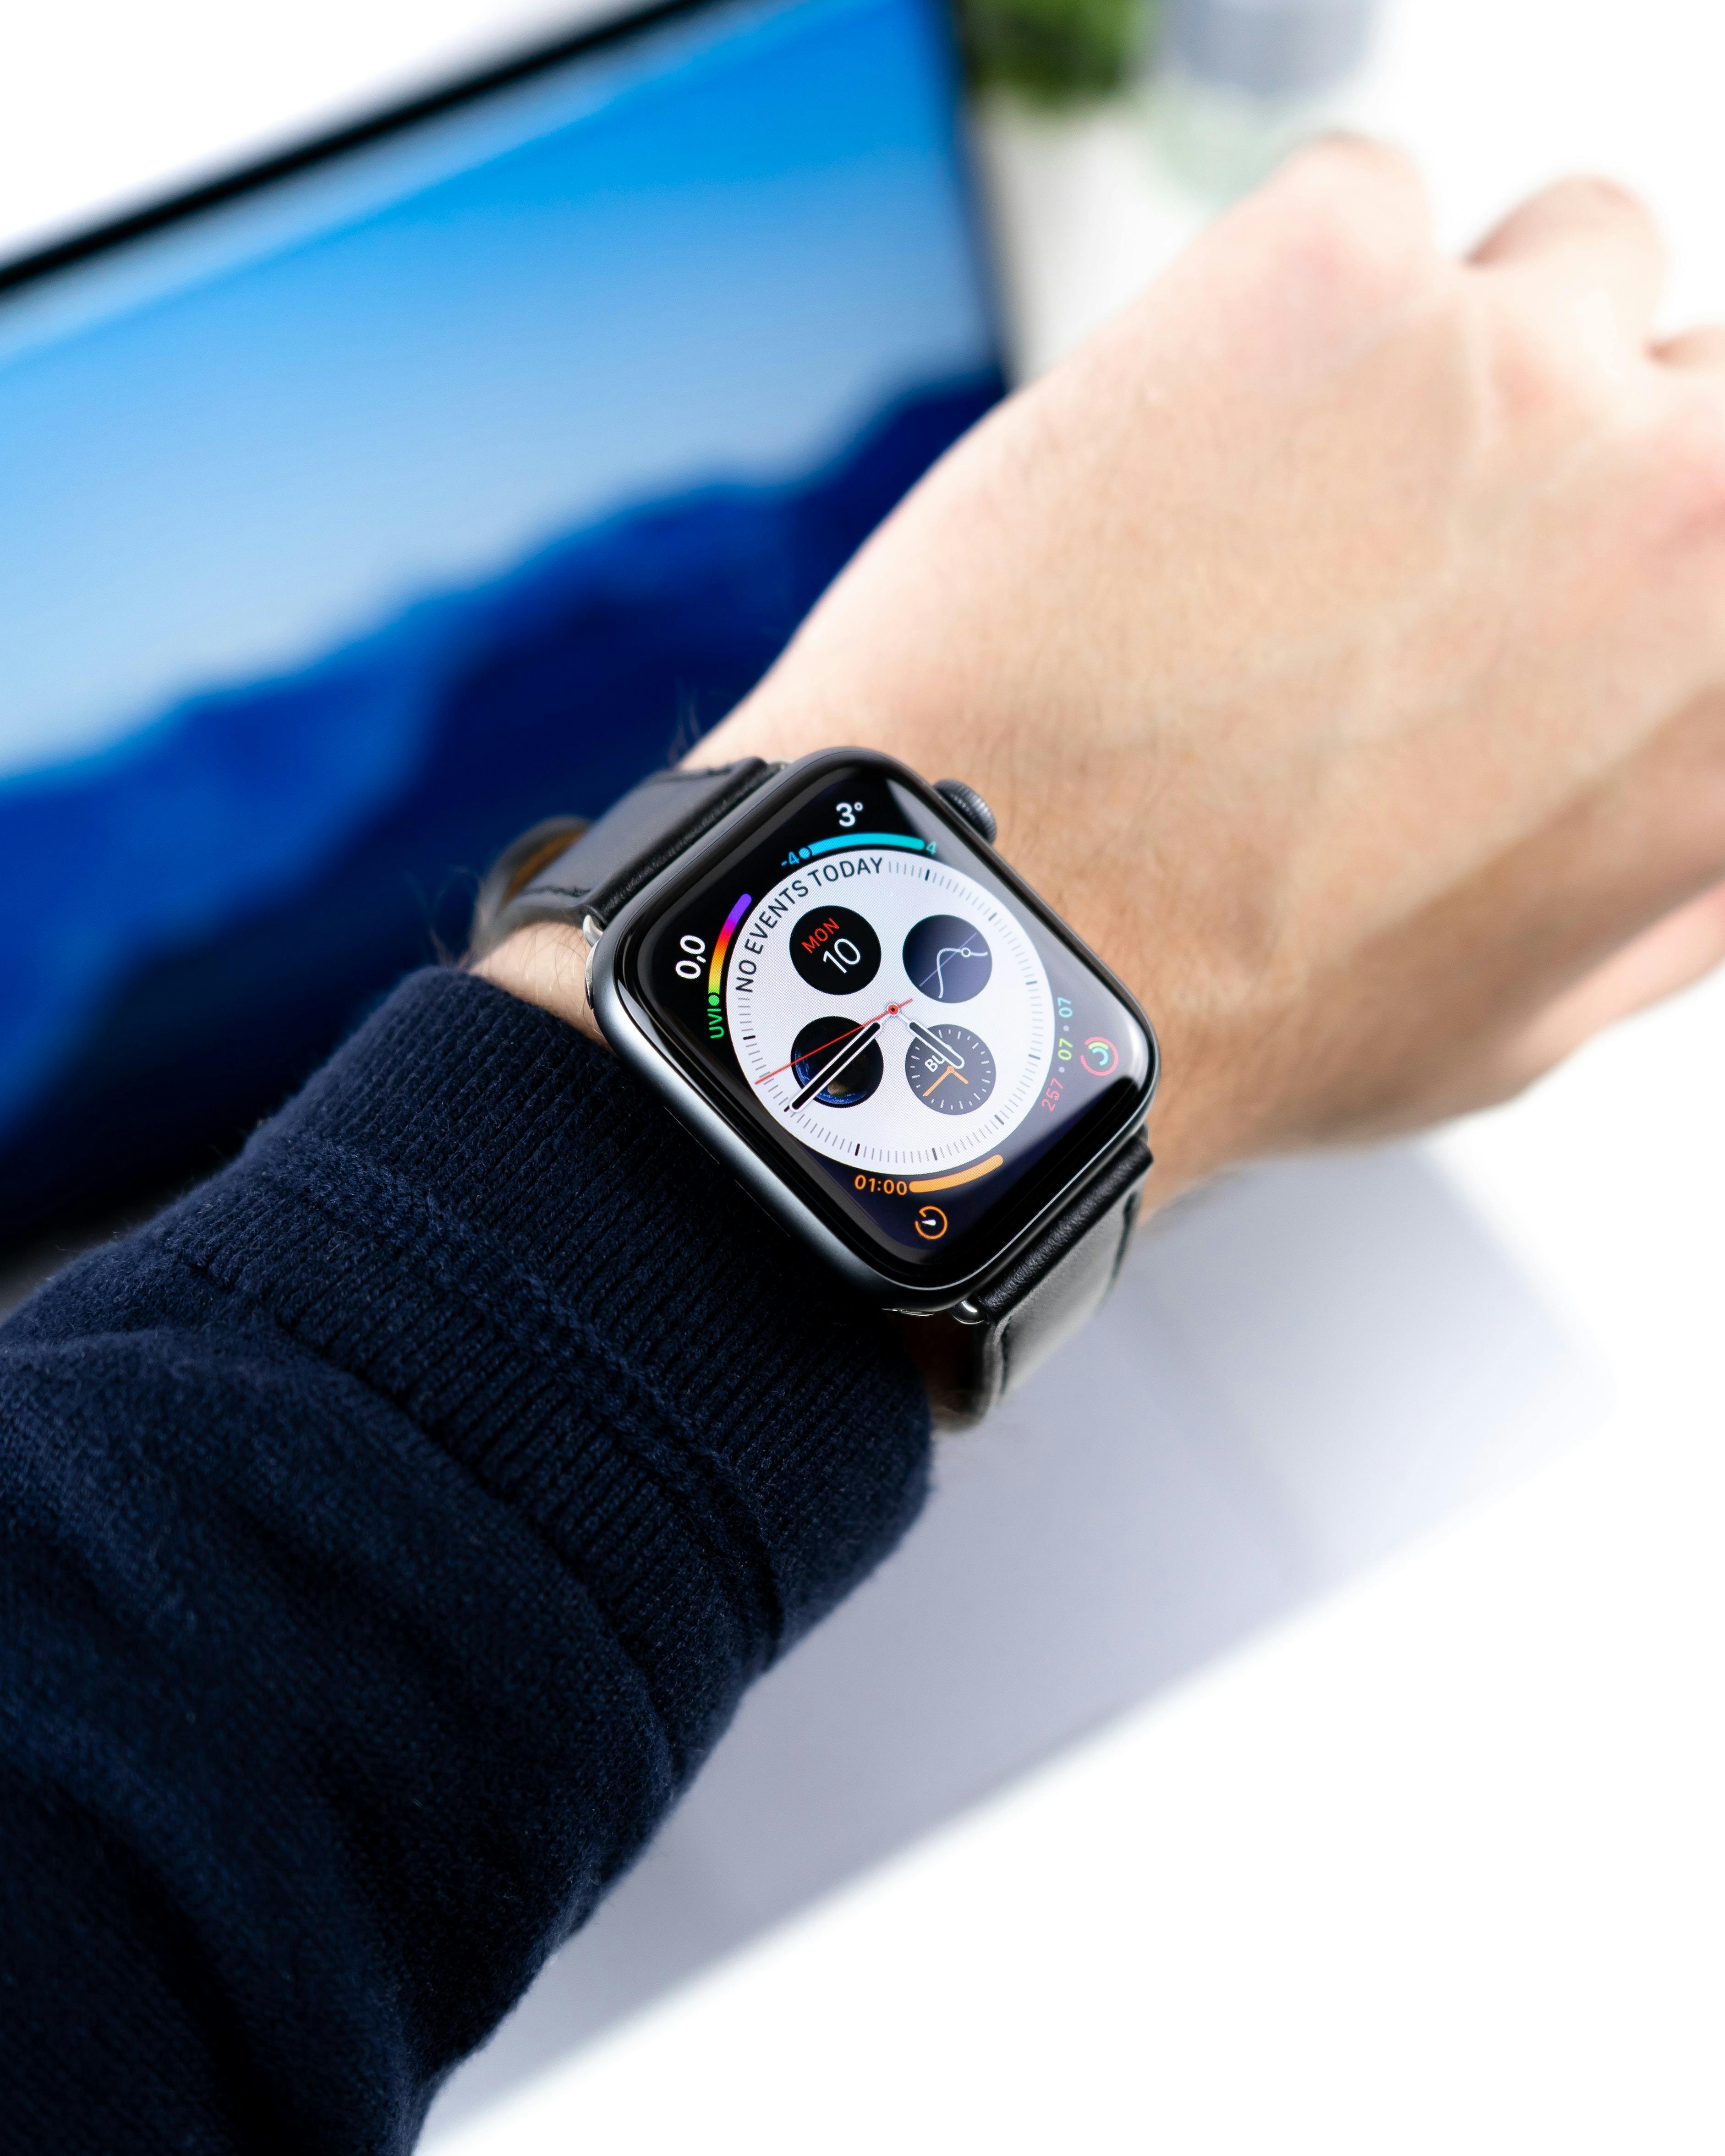 Apple Watch on a persons wrist.